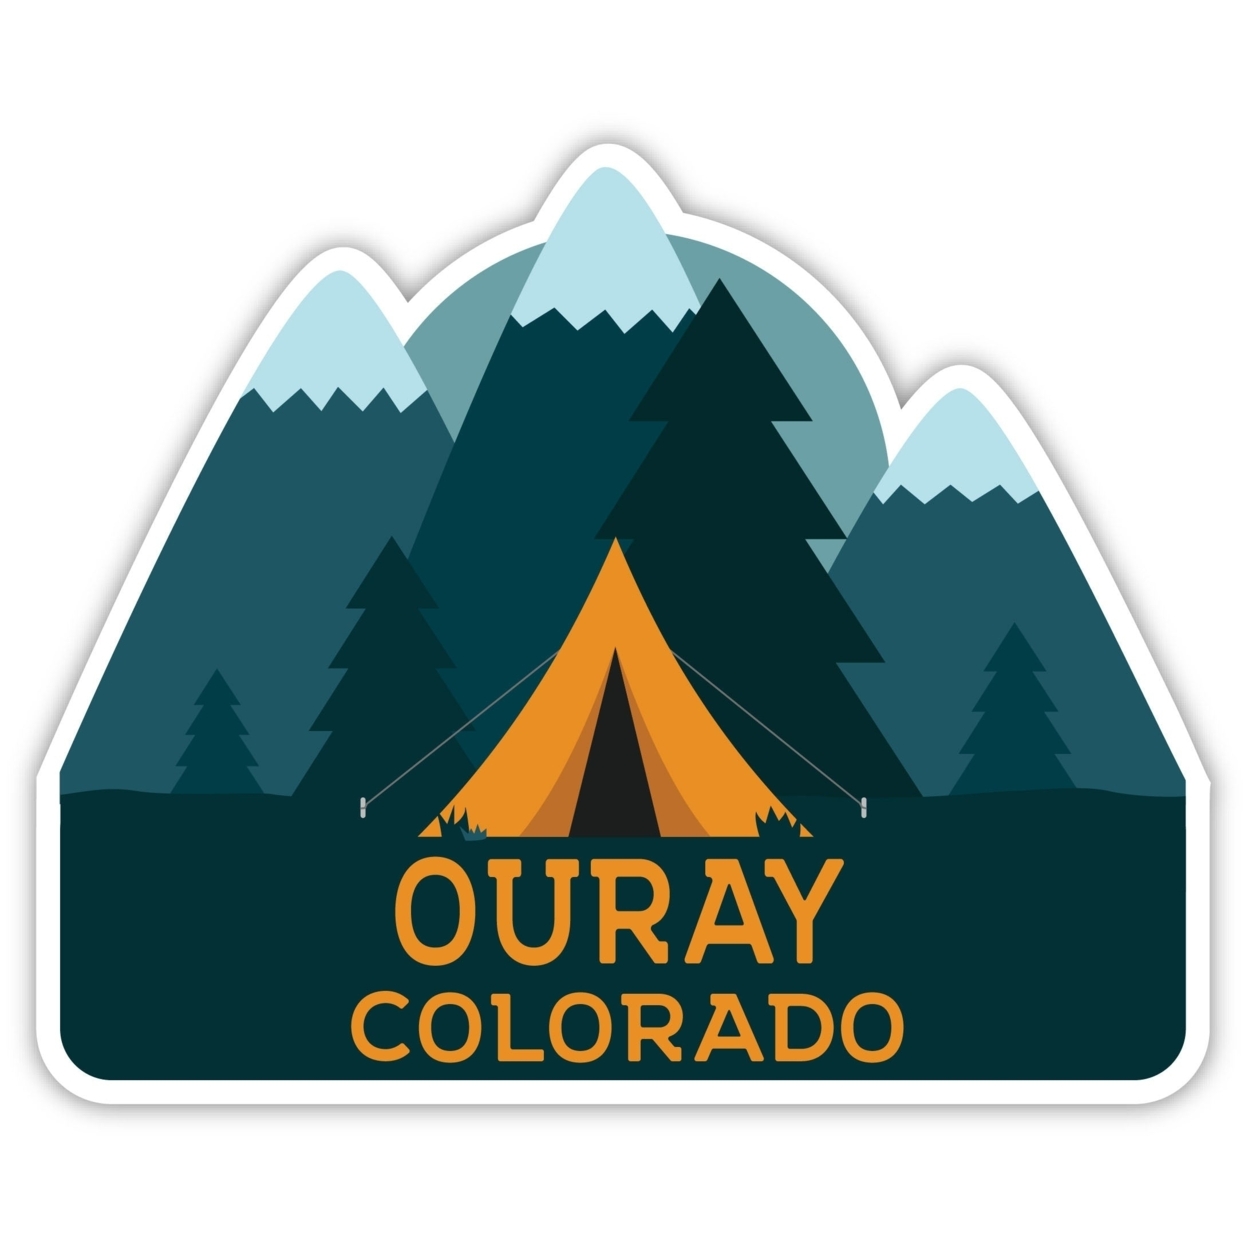 Ouray Colorado Souvenir Decorative Stickers (Choose Theme And Size) - Single Unit, 2-Inch, Camp Life